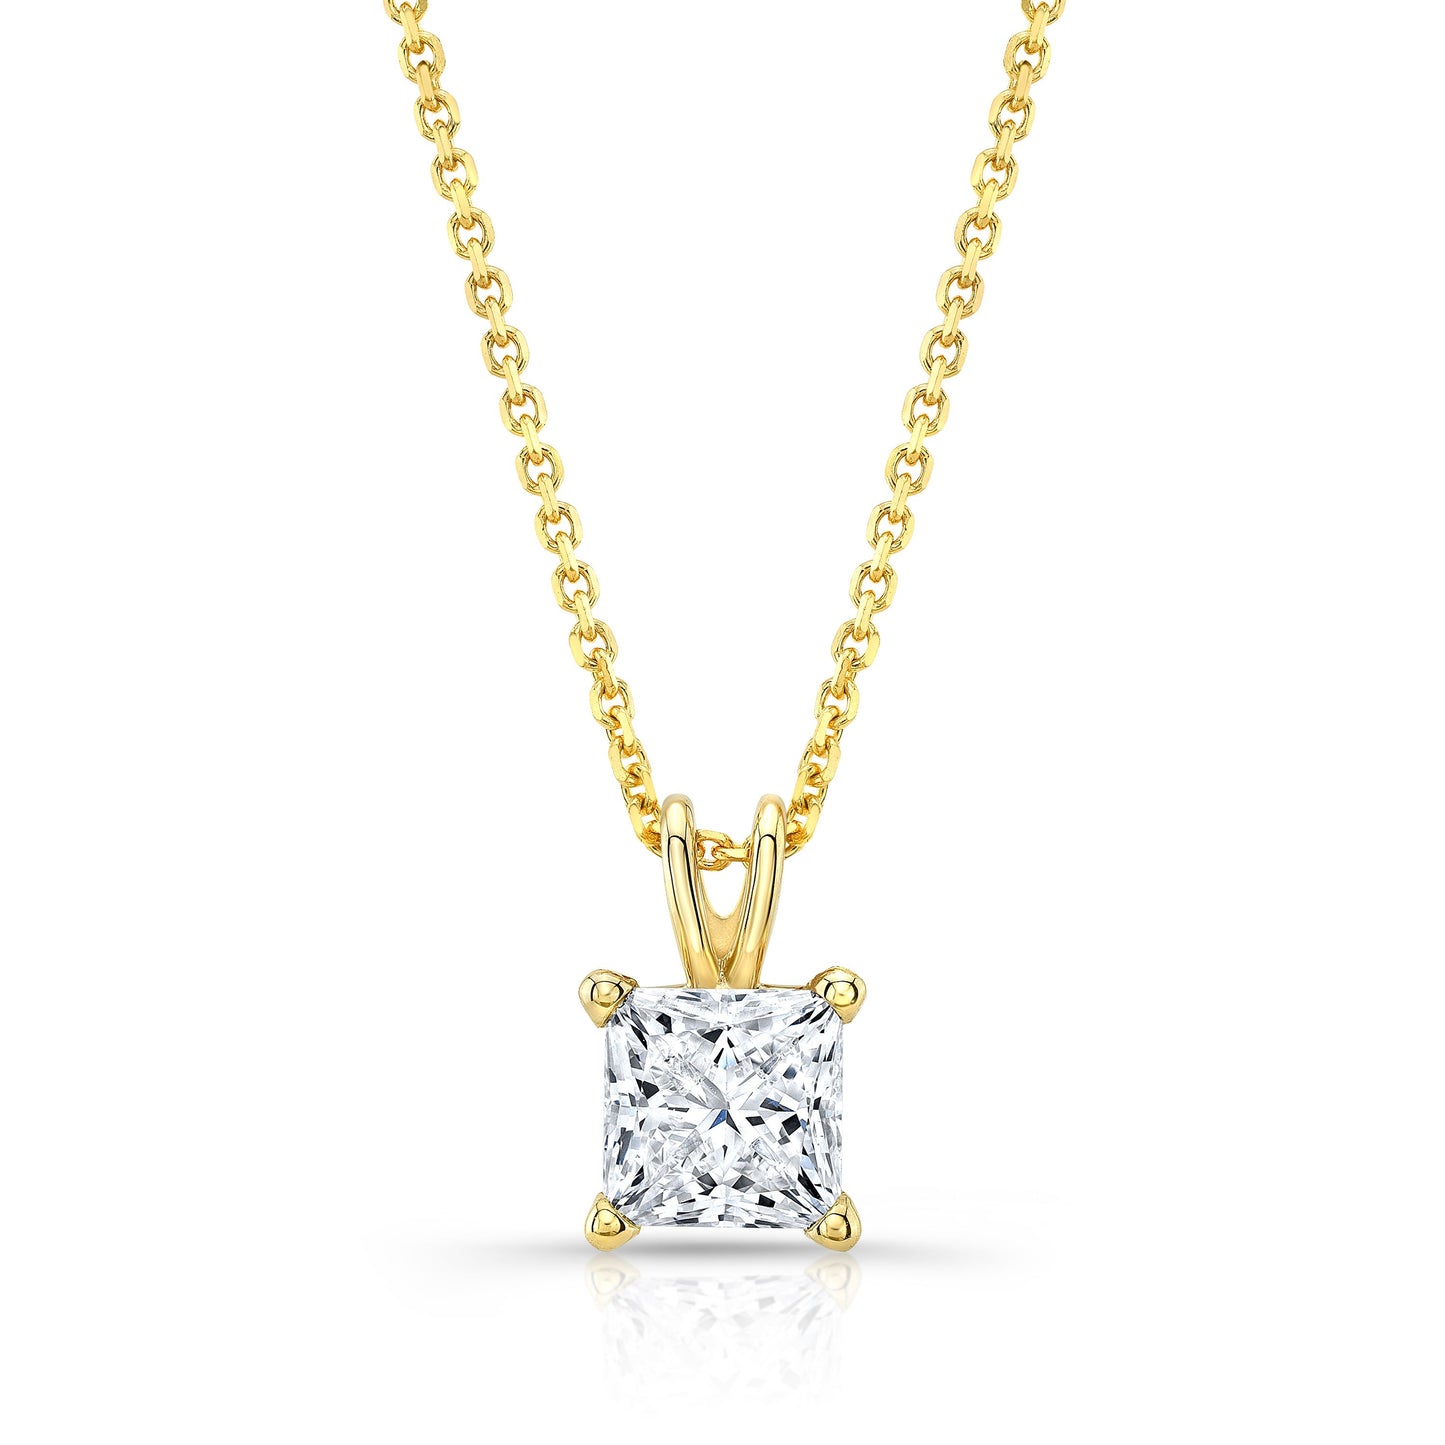 Princess Diamond Solitaire Pendant In A 14k Yellow Gold 4-prong Basket Setting, 0.75ct. T.w. (hi, Si1-si2)